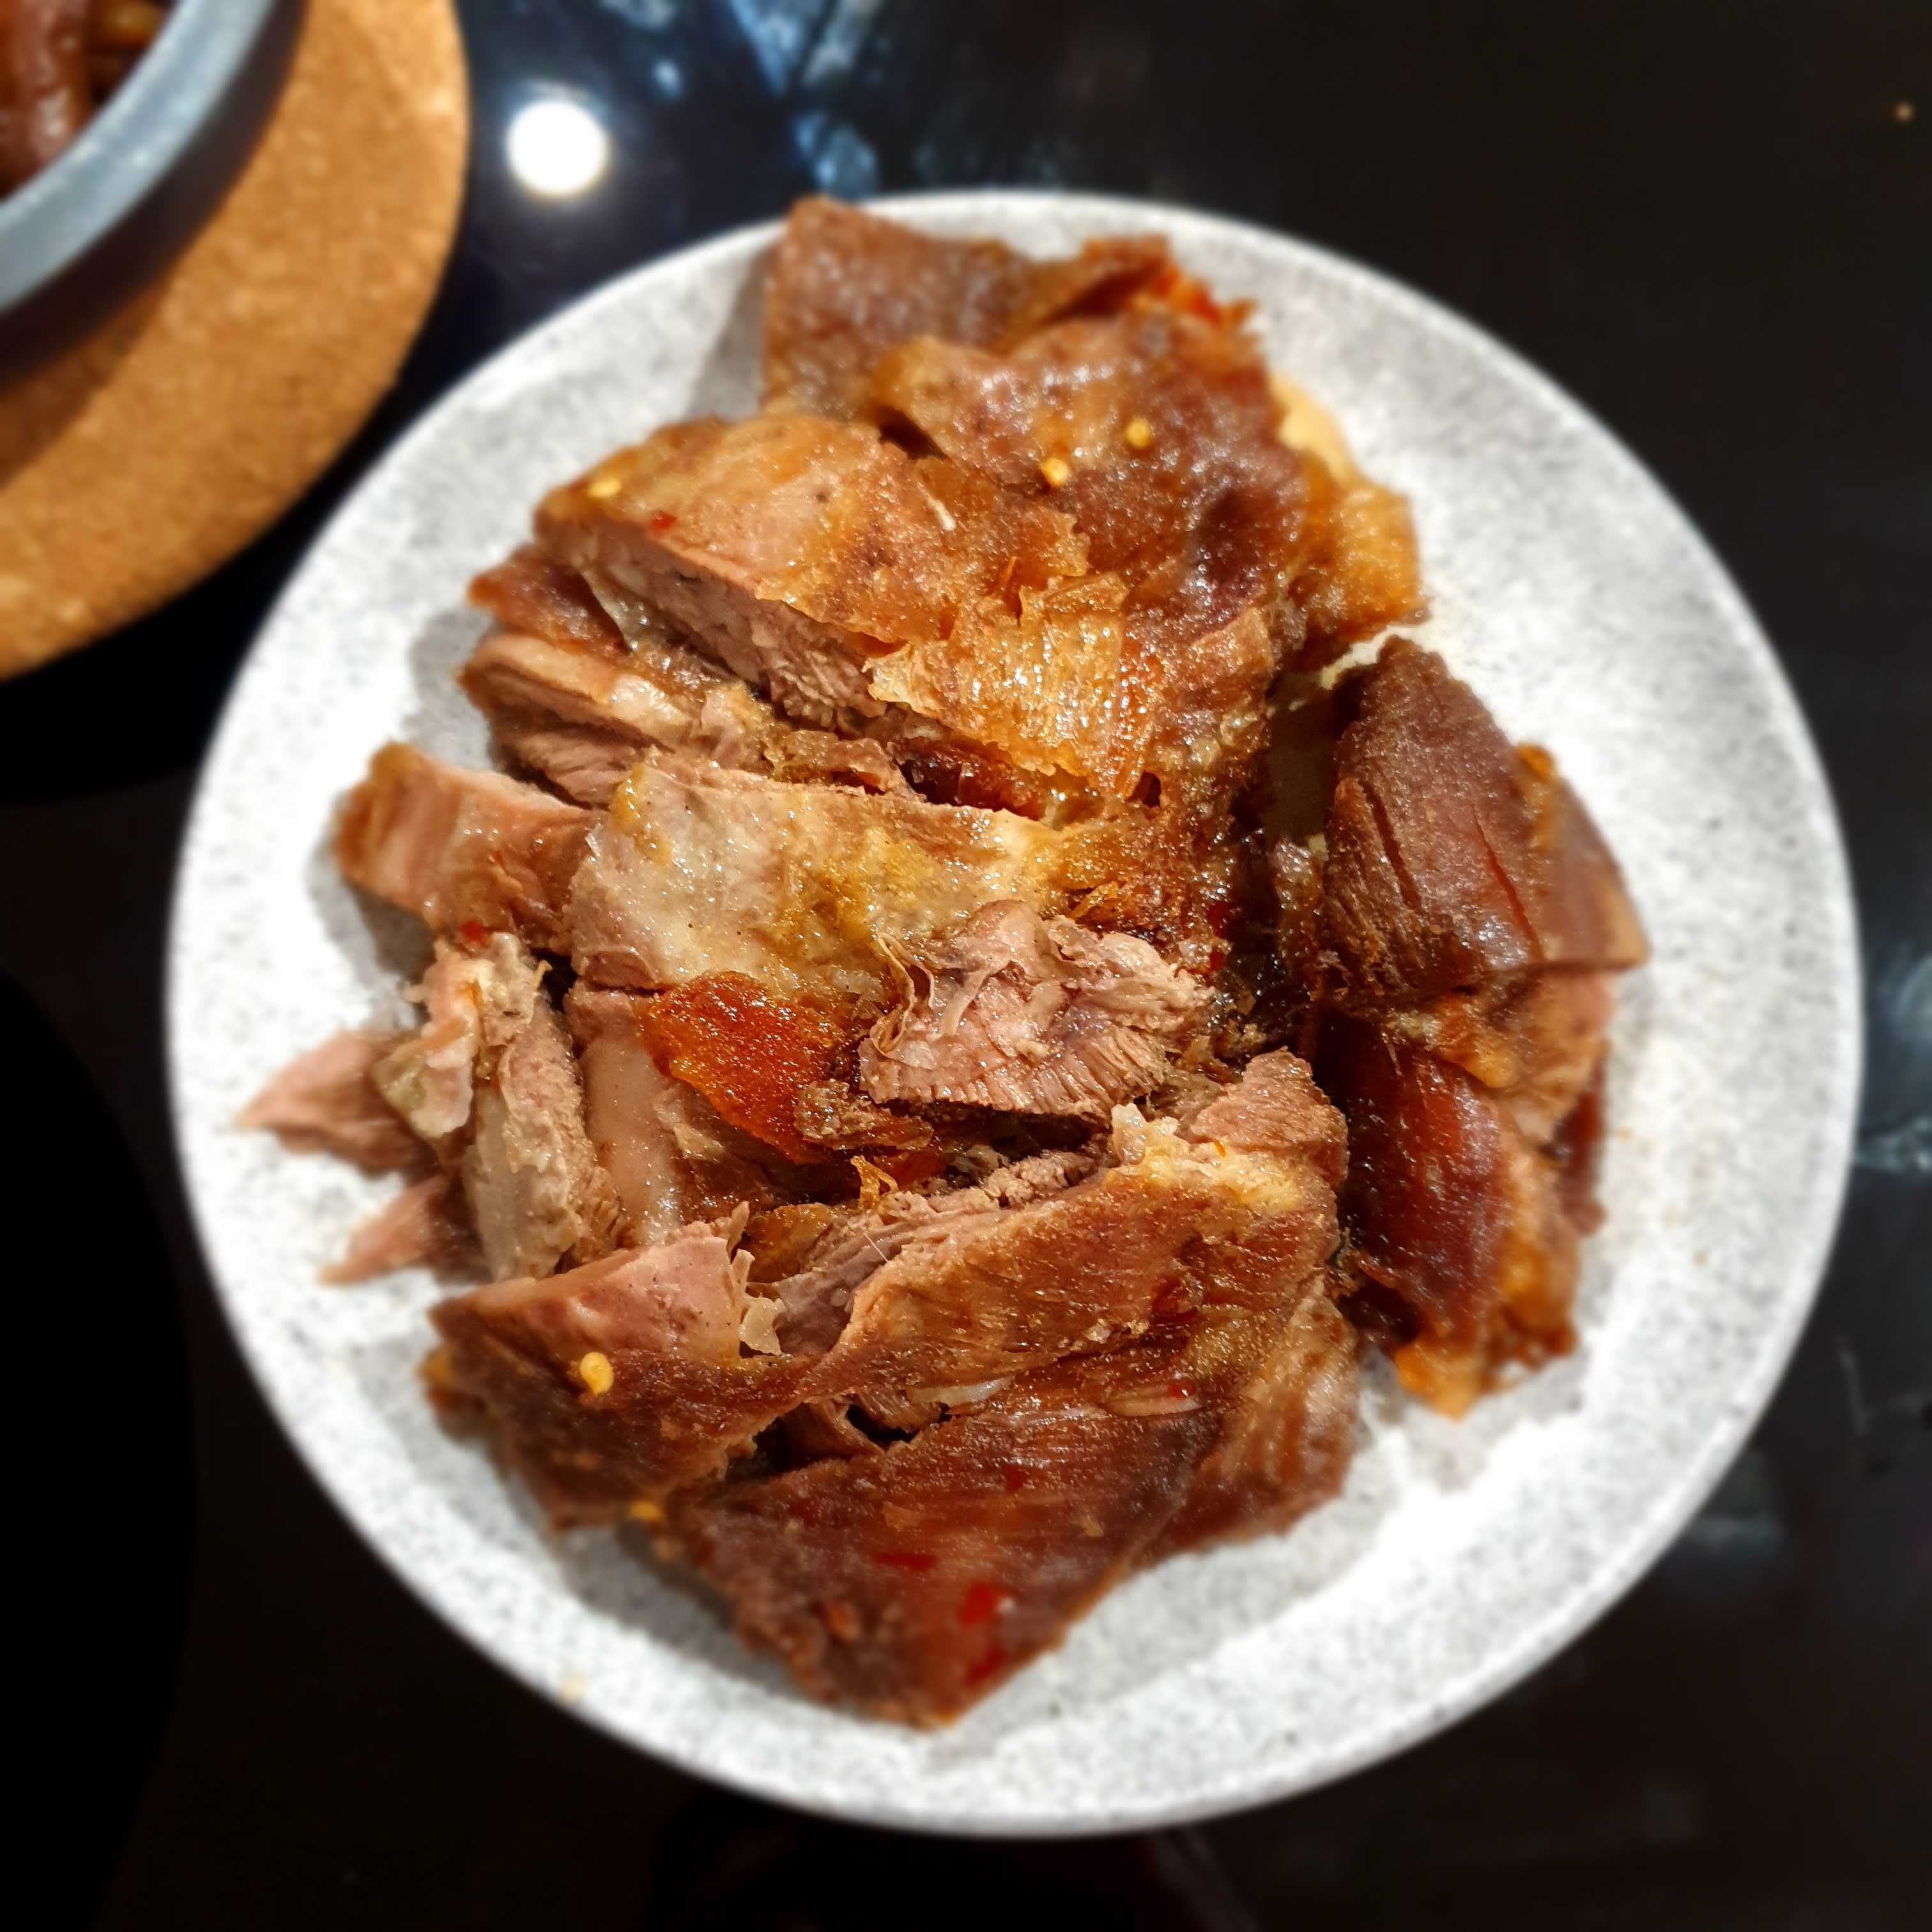 Family feed: Dry-fried spicy lamb from China Tea House makes the world a better place